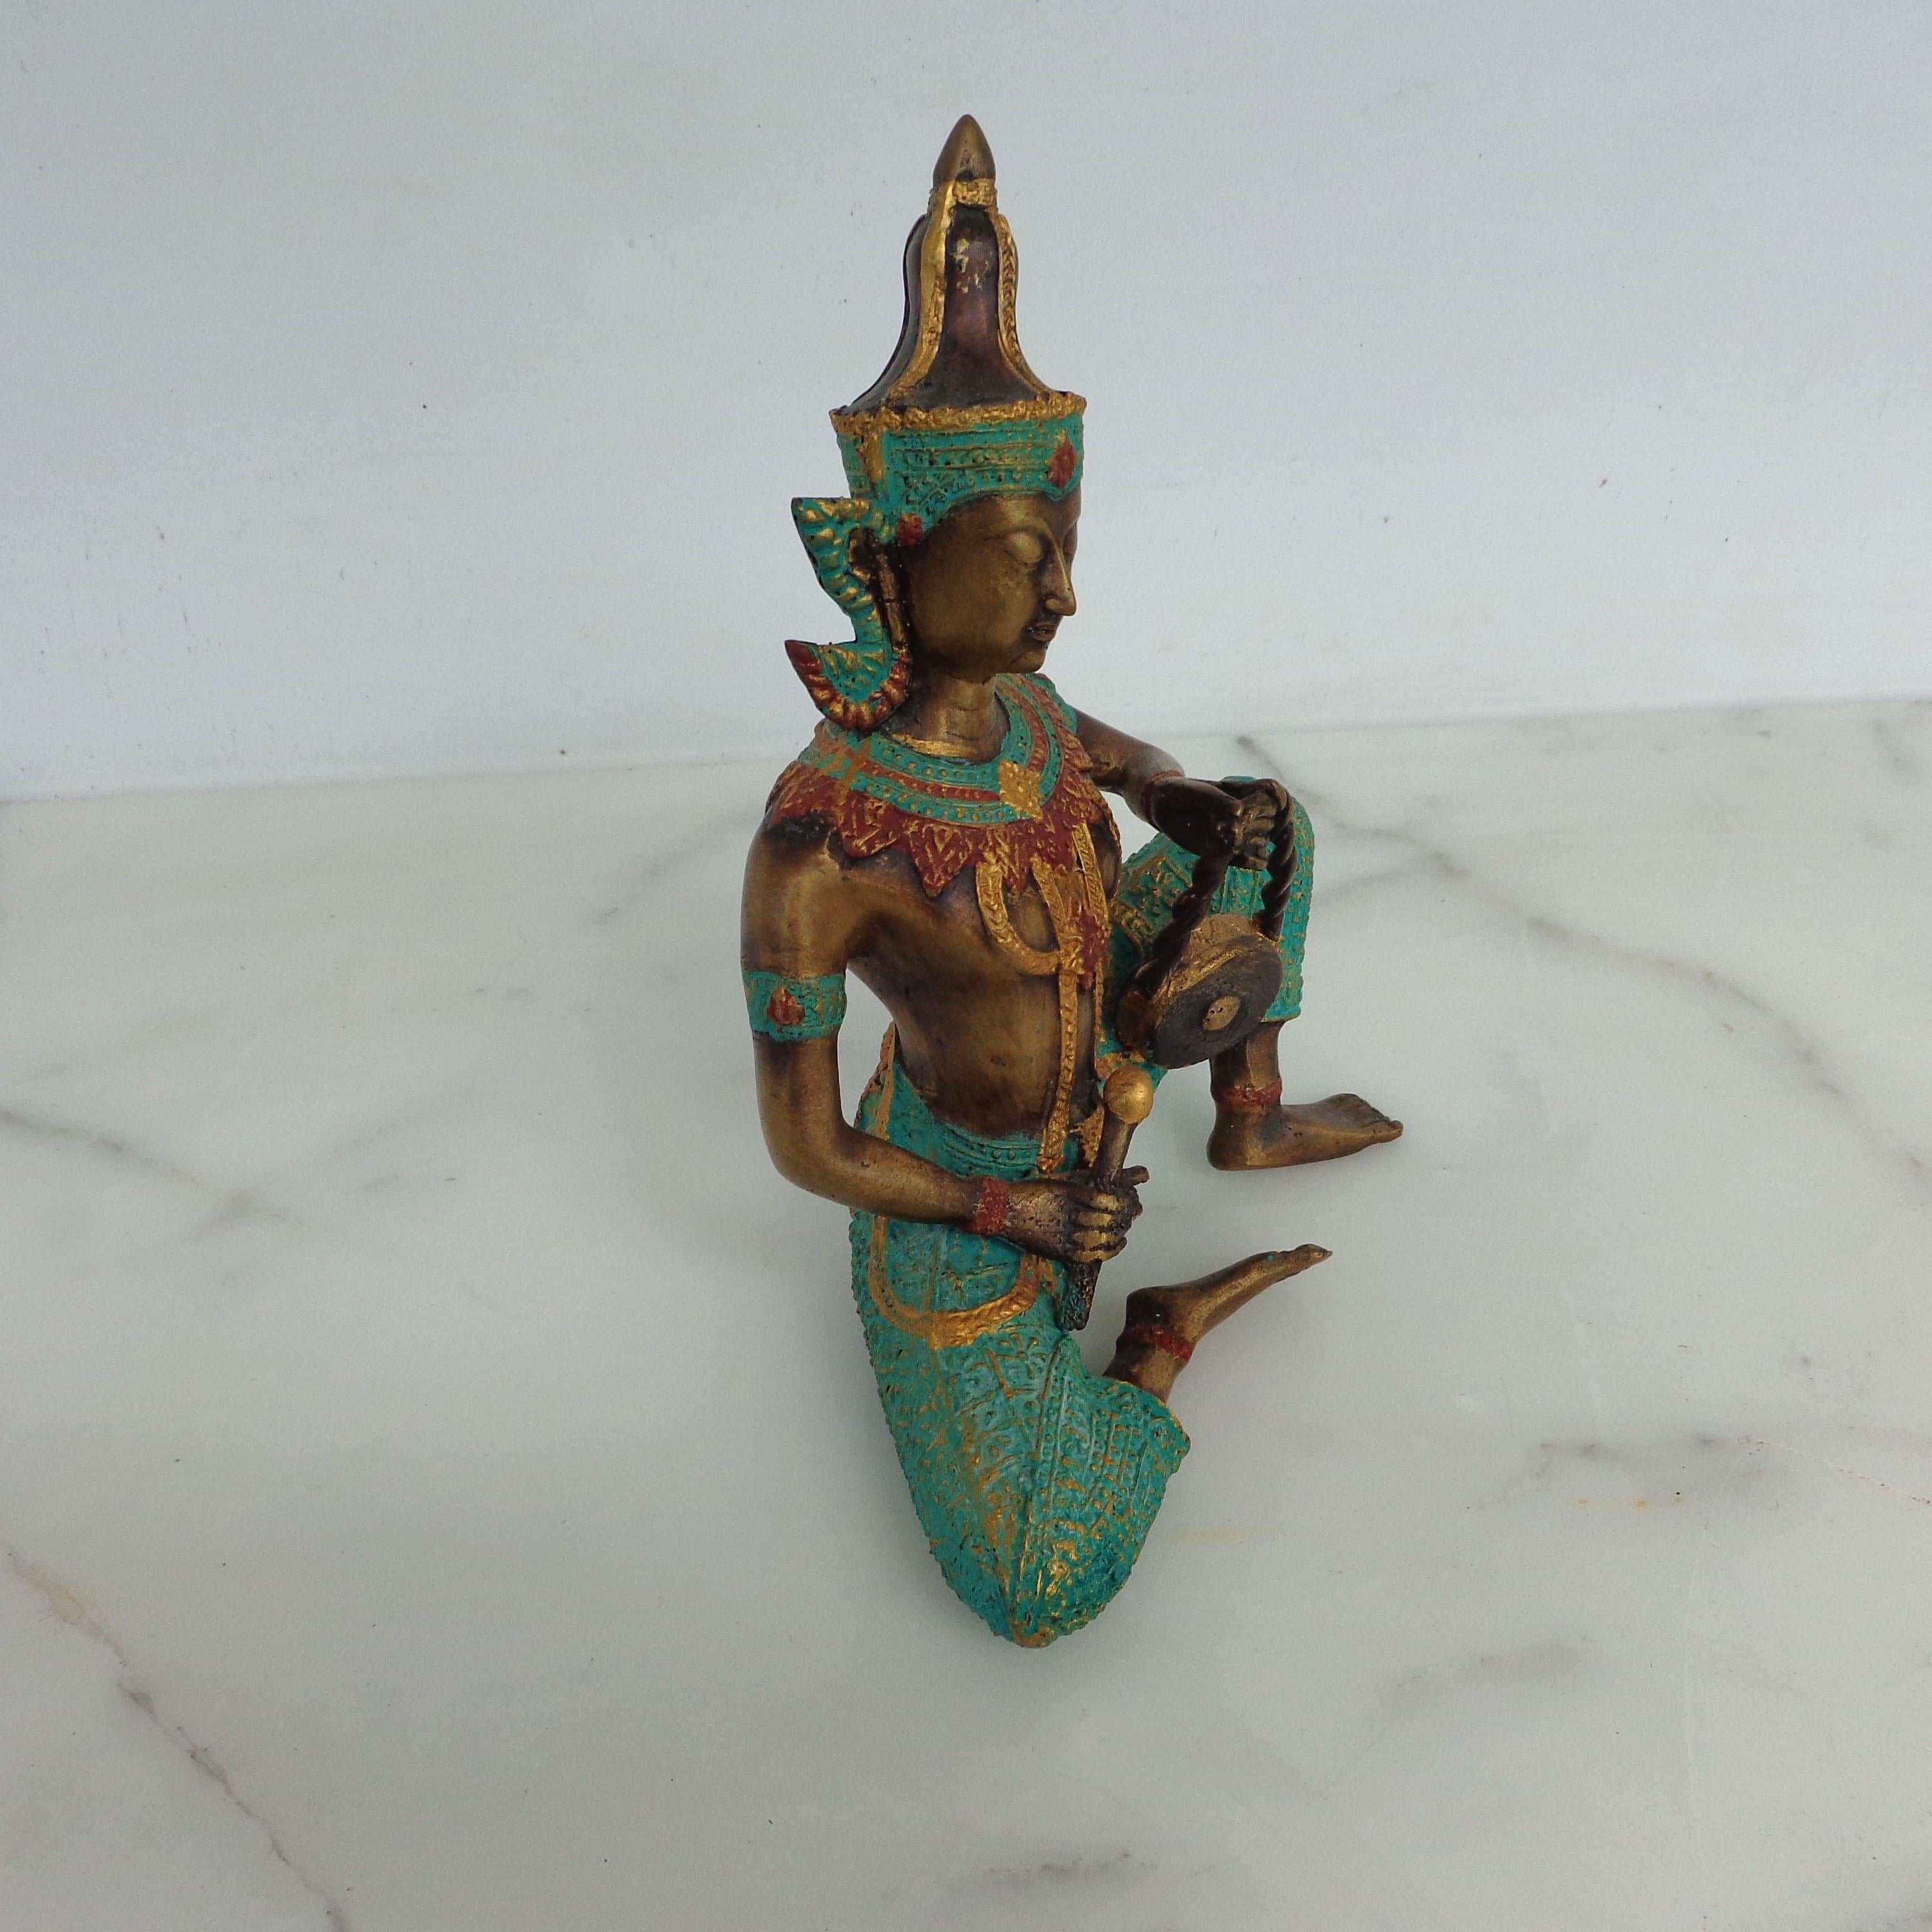 Bronze statue of a musician in ceremonial costume playing a traditional drum instrument.
Rich in color and details.
 

 